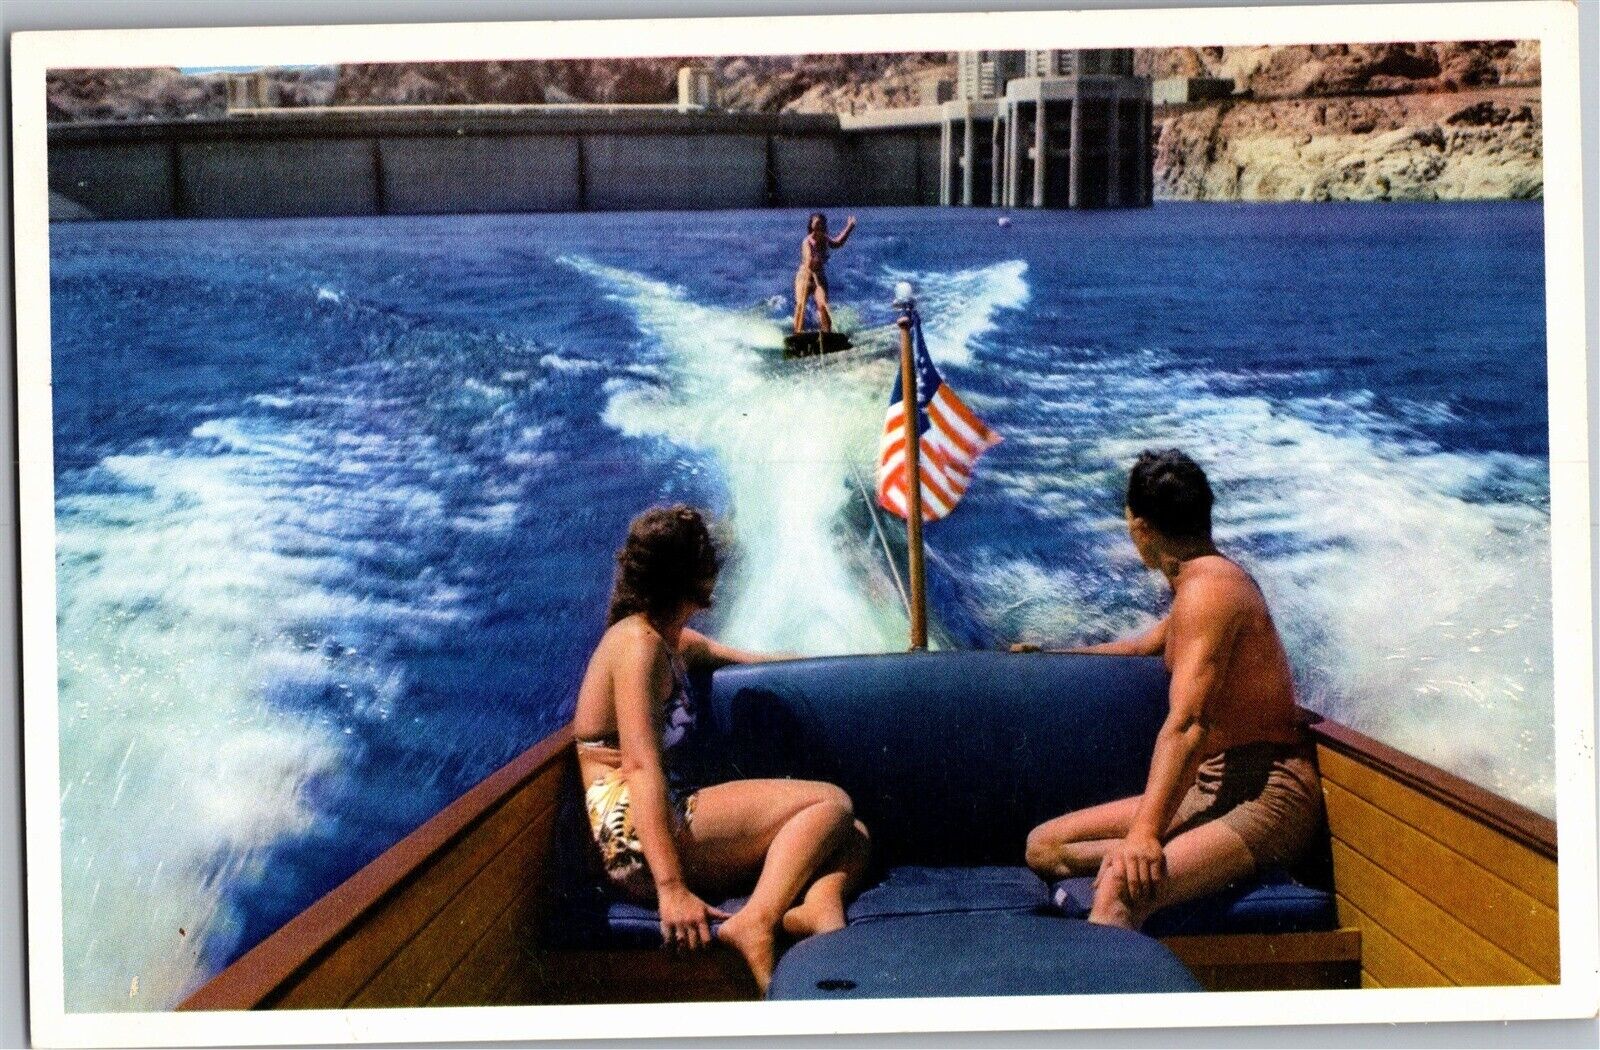 Water Skiing on Lake Mead, Union Pacific Pictorial c1963 Vintage Postcard T23